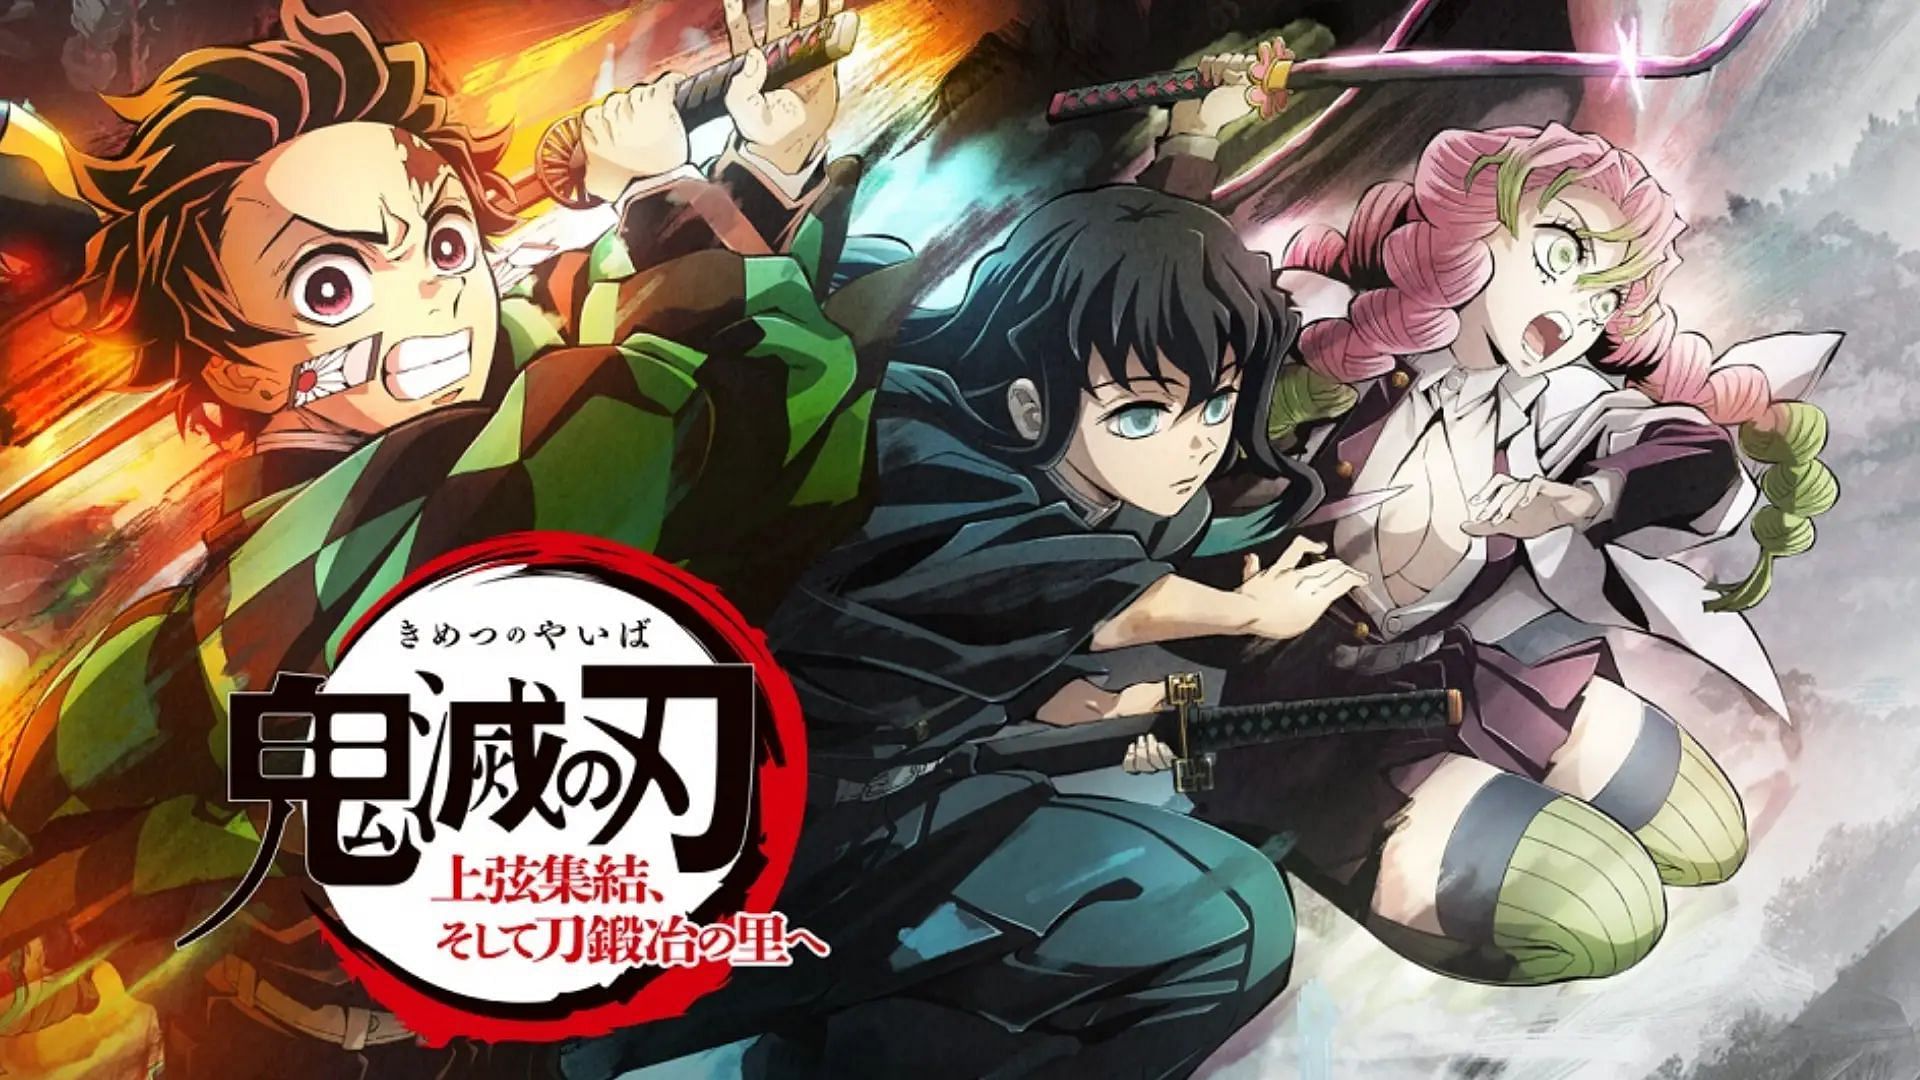 Demon Slayer Season 3: What We Know Following Its Movie Premiere